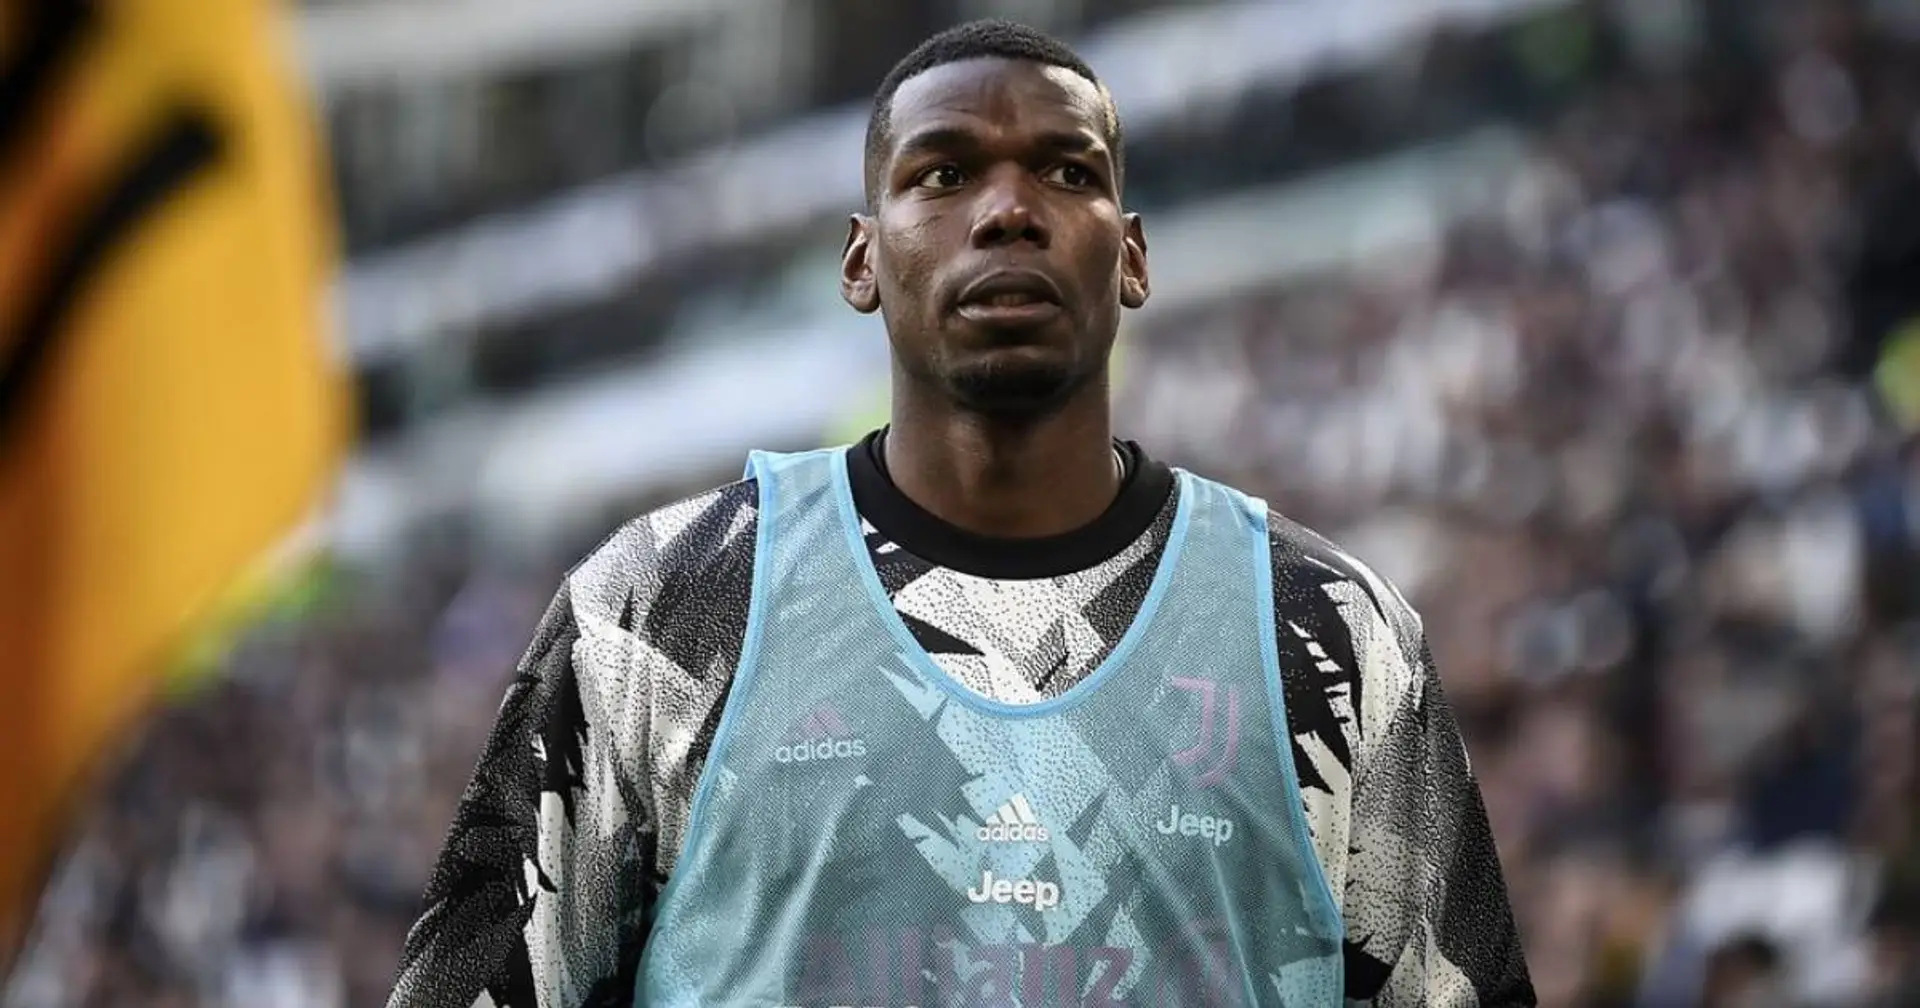 Paul Pogba dropped from Juventus squad due to 'disciplinary reasons'